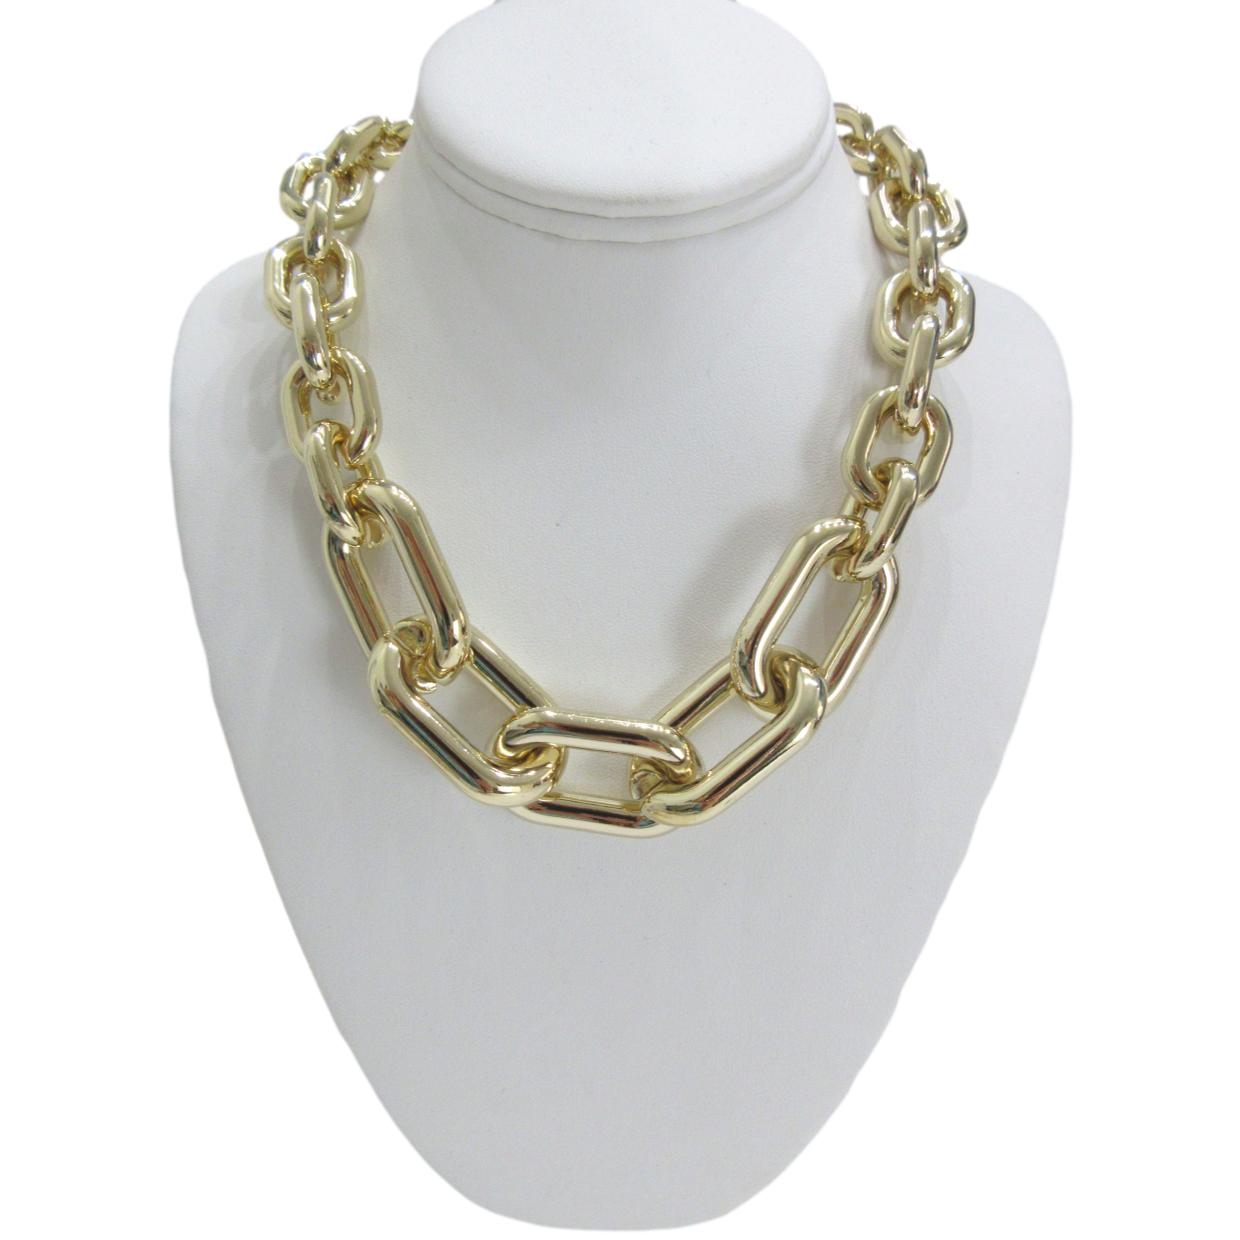 Chunky Rectangular Link Necklace Made in Italy - Marti Rosenburgh Designs